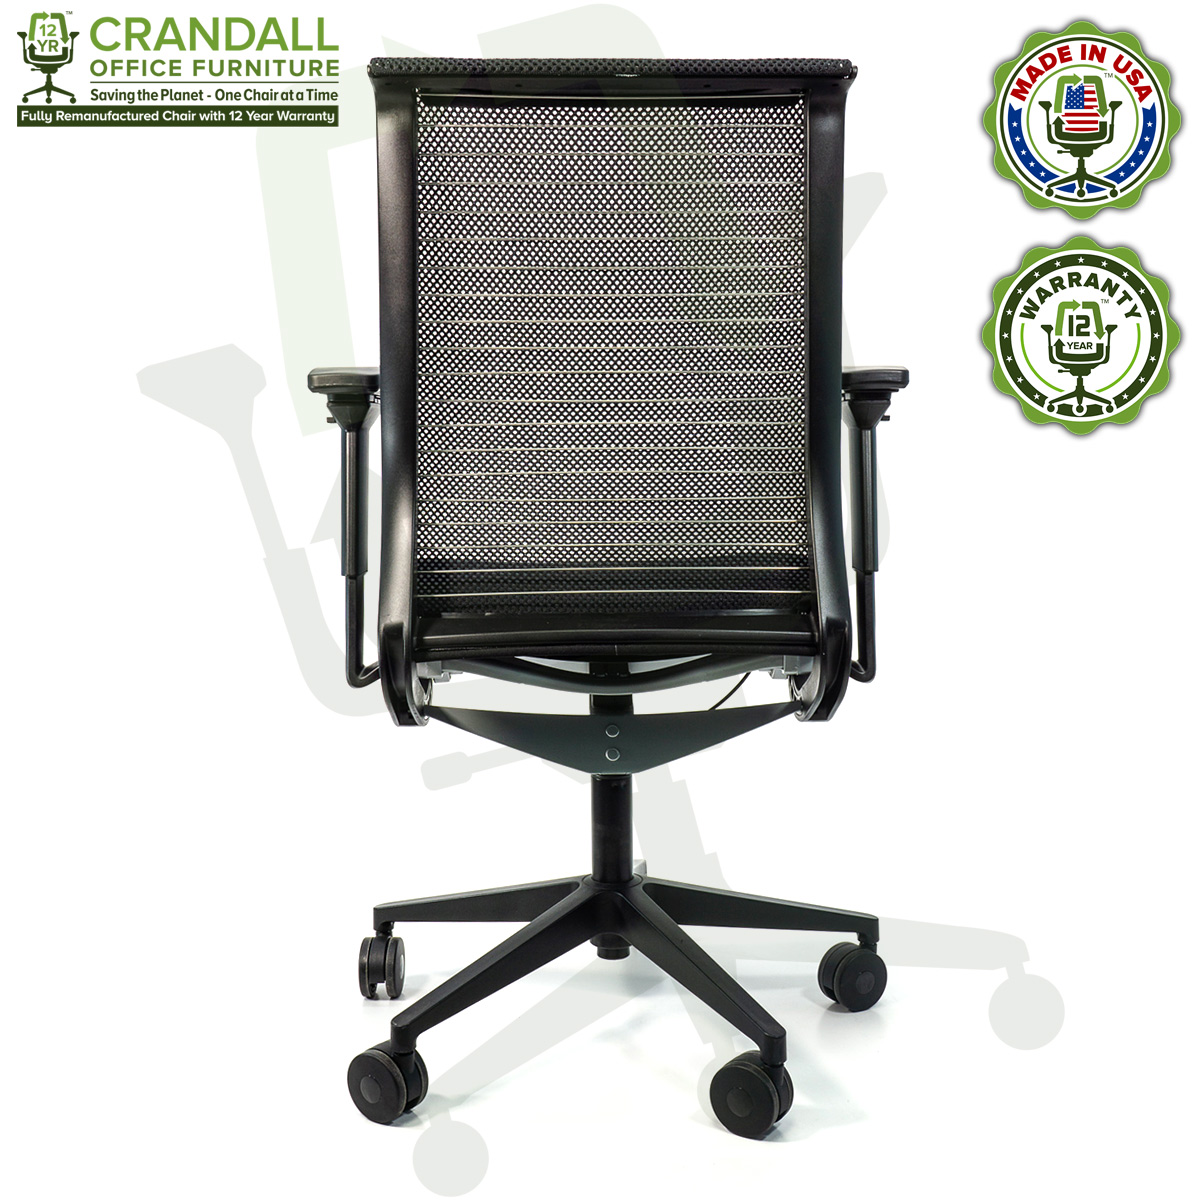 Crandall Office Furniture Remanufactured Steelcase Think Chair with 12 Year Warranty - 05